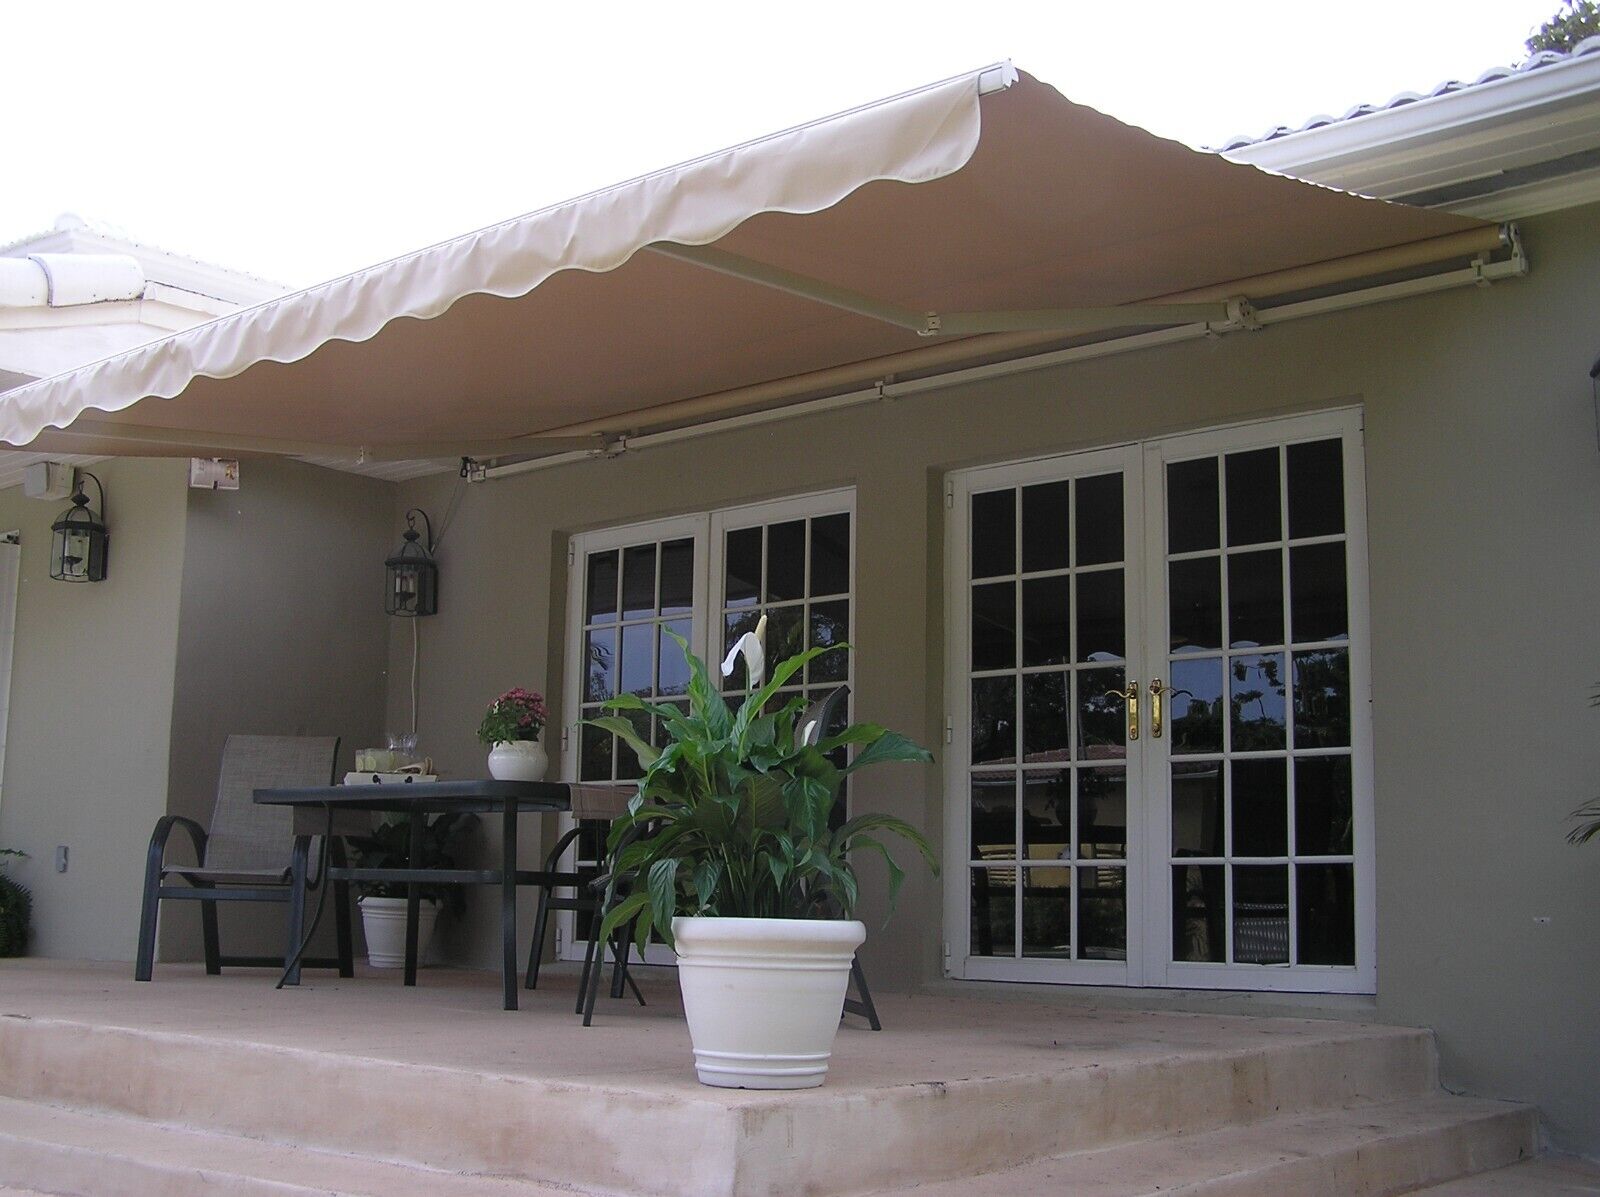 We sell supply and install quality retractable patio awnings in Kenya-Leading Manufacturer of adjustable awnings